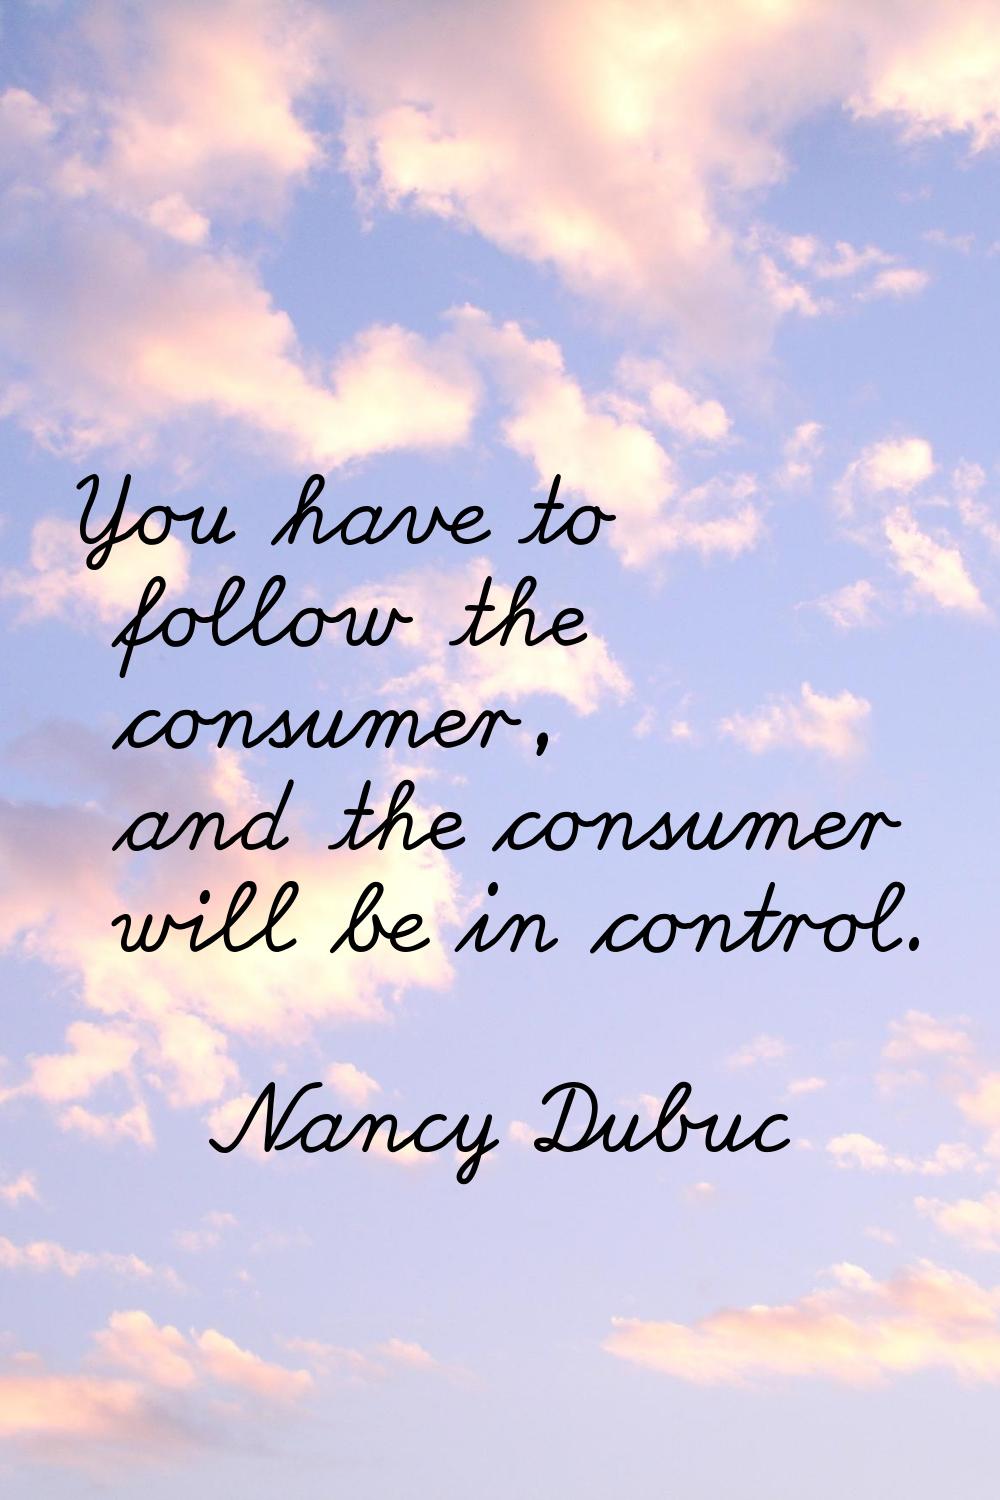 You have to follow the consumer, and the consumer will be in control.